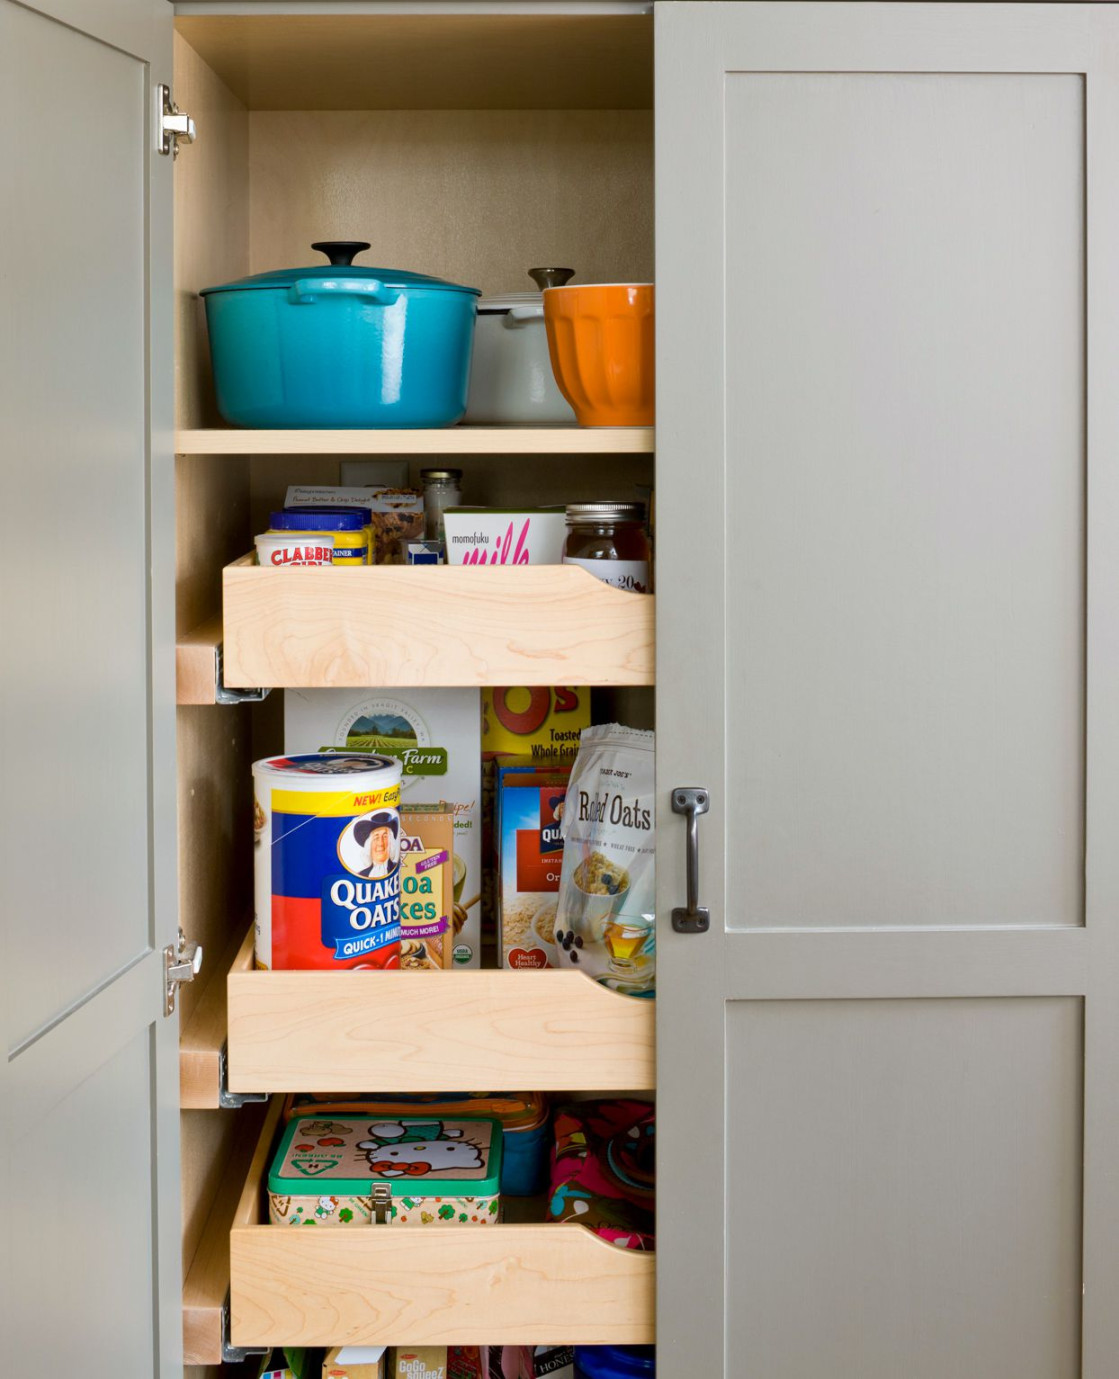 Tips for How to Organize Kitchen Cabinets